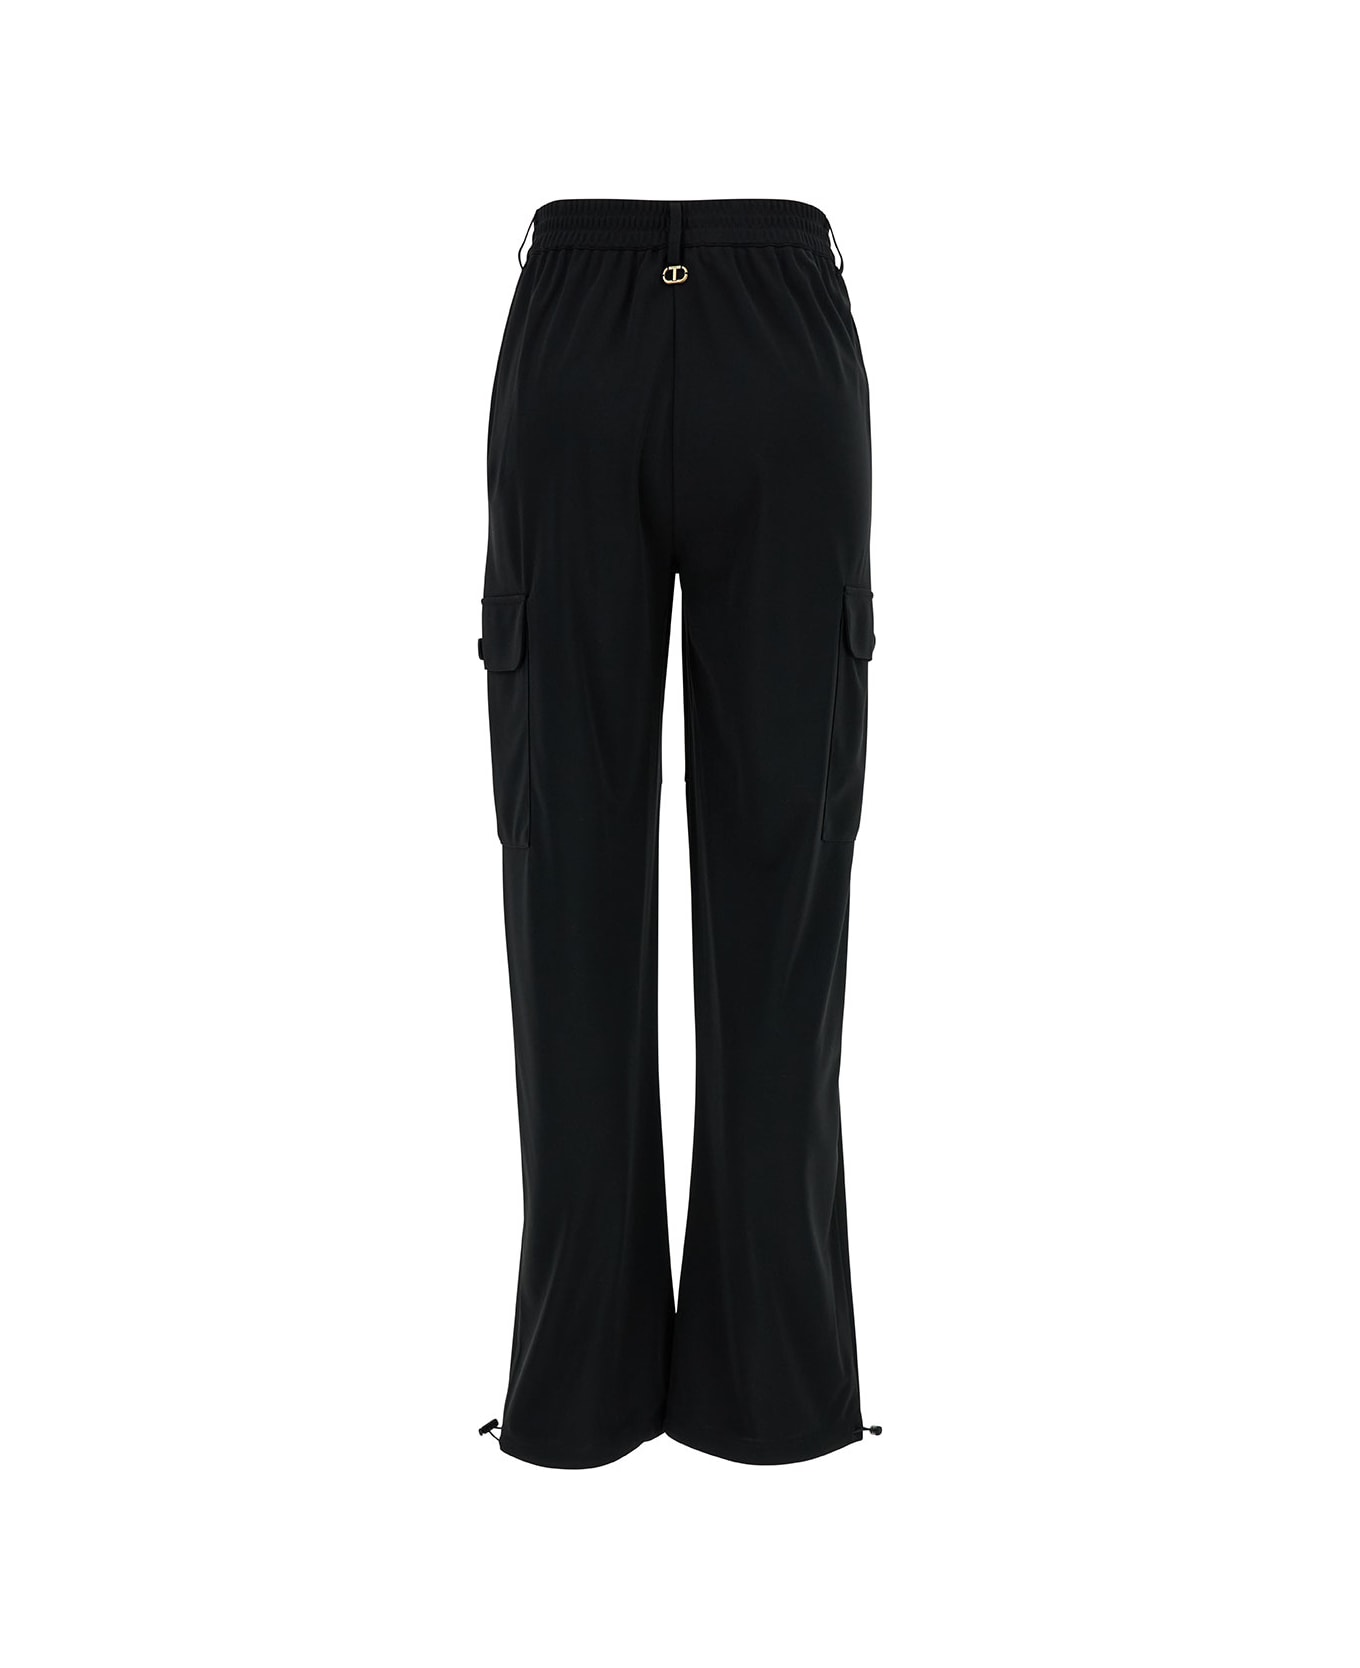 TwinSet Black Cargo Pants With Oval T Patch In Tech Fabric Woman - Black